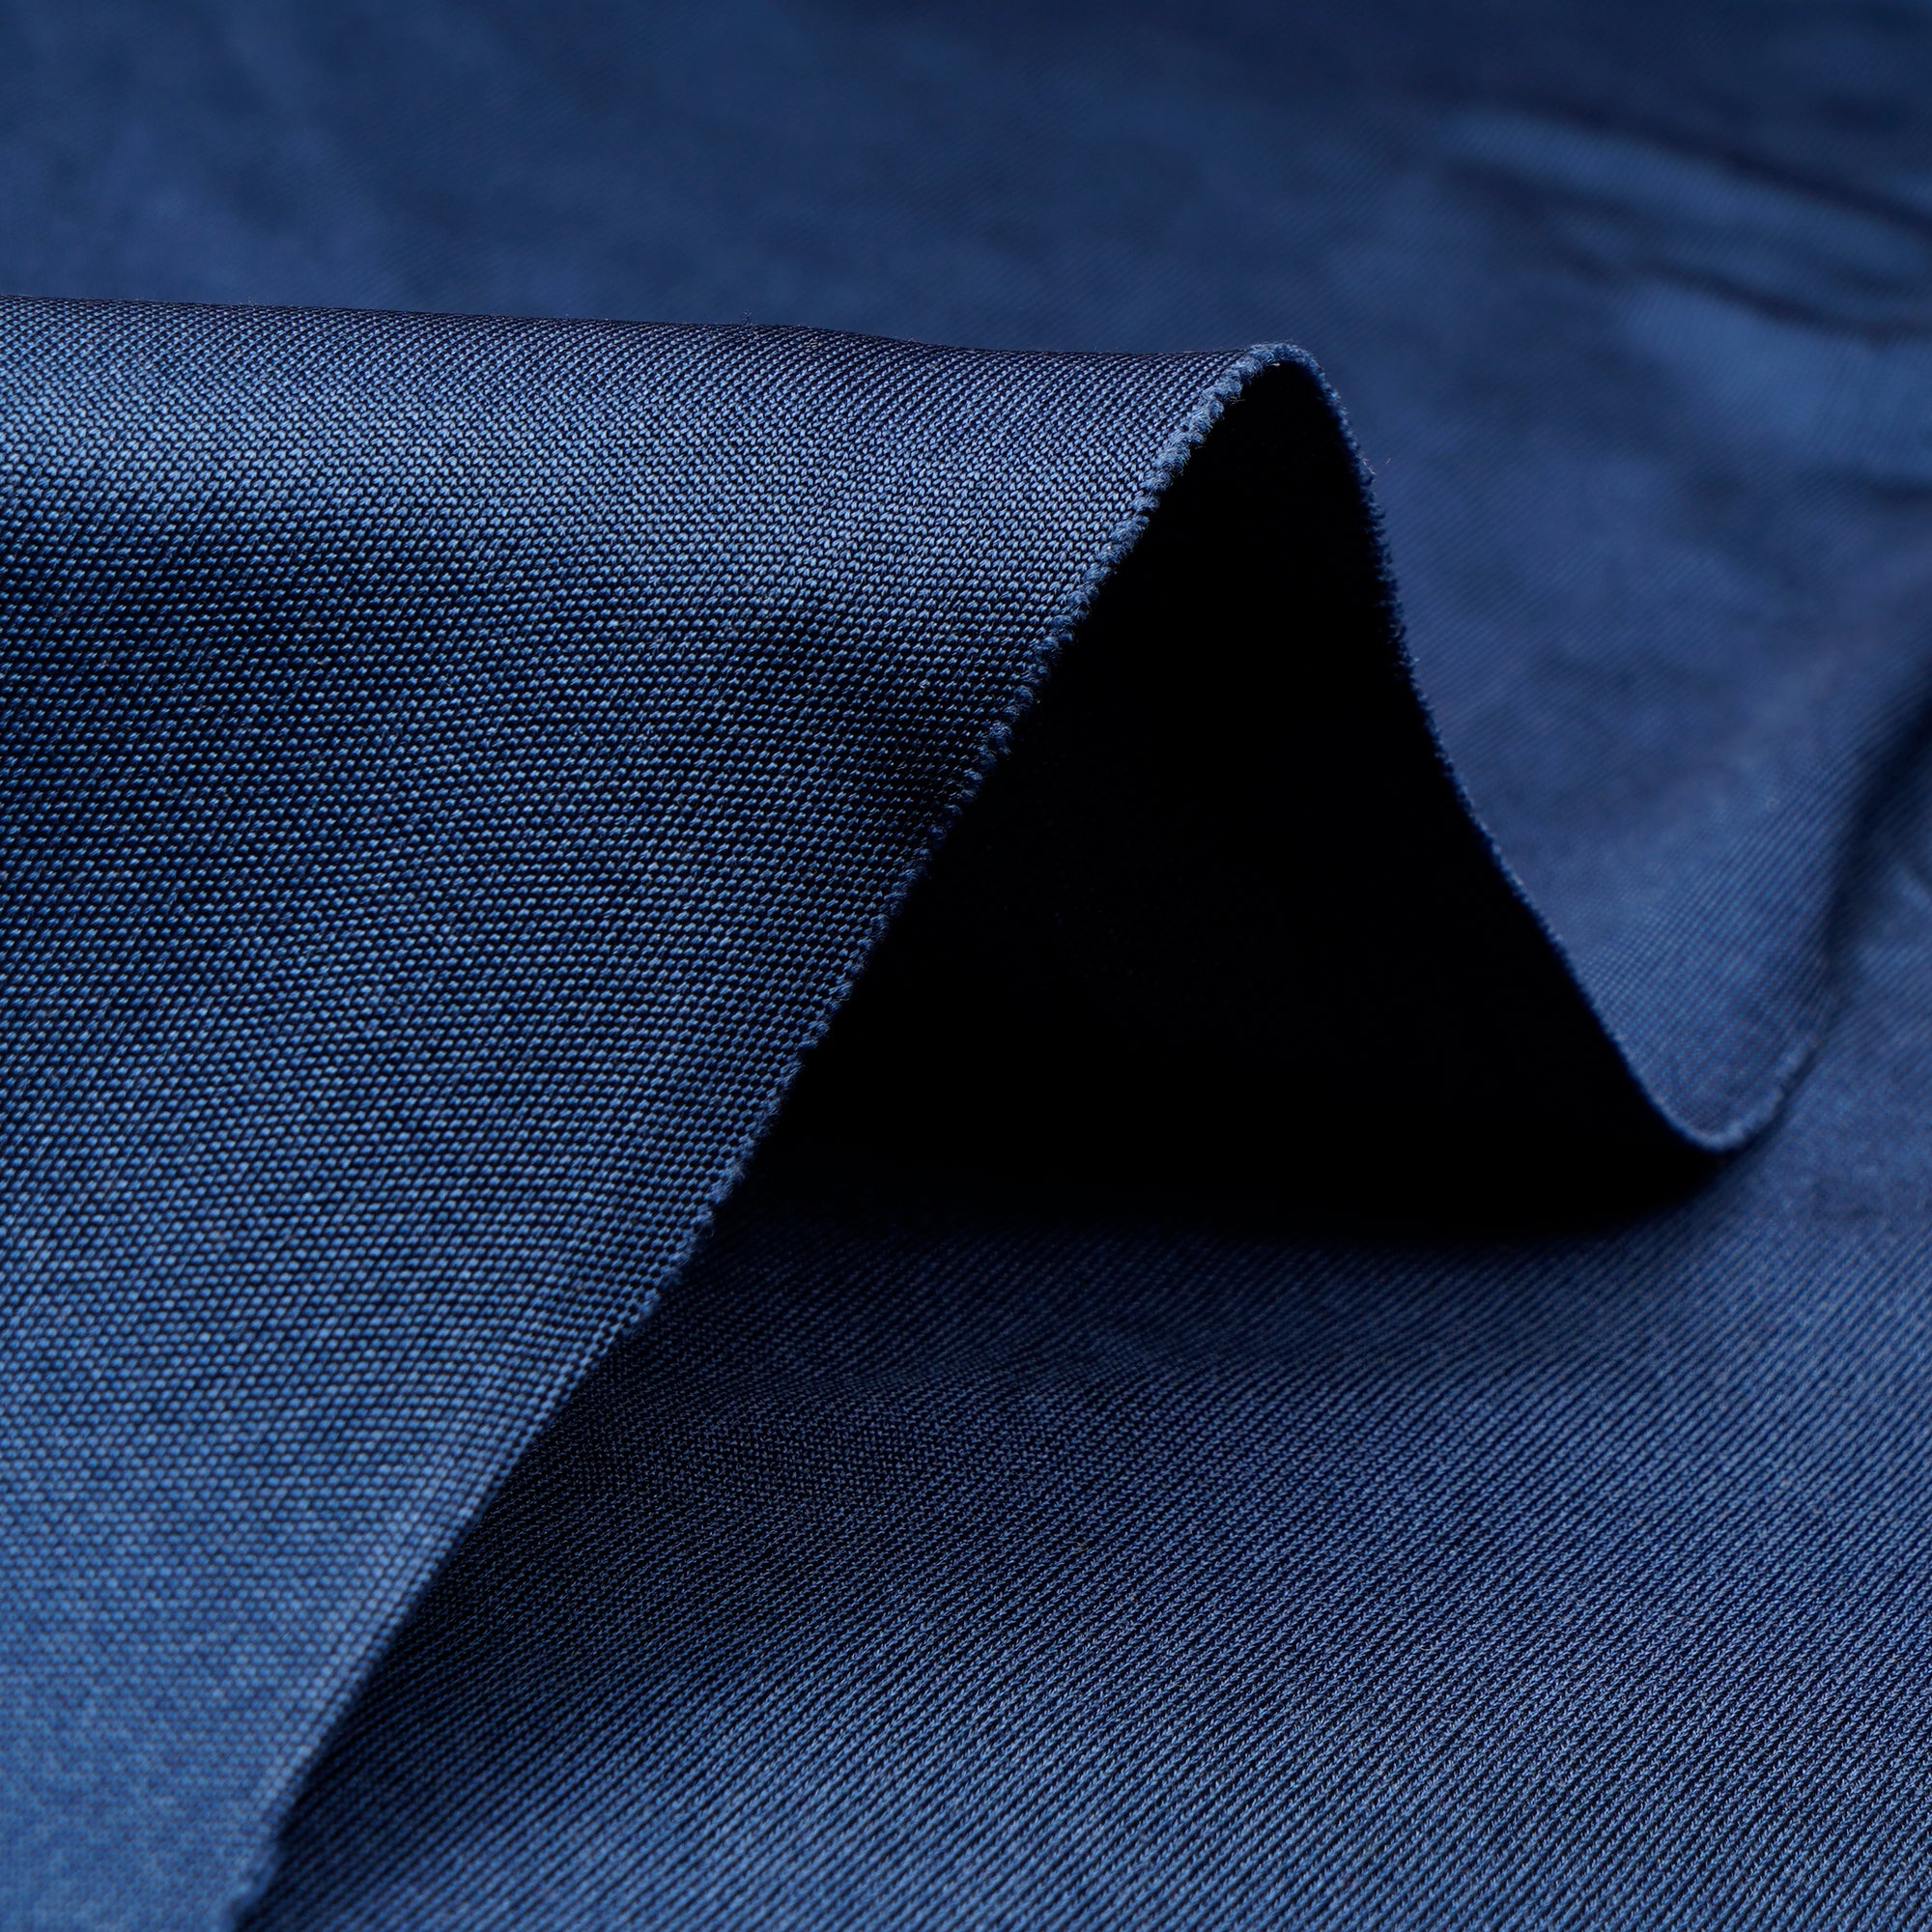 Dark Blue Color Silk Knitted Fabric